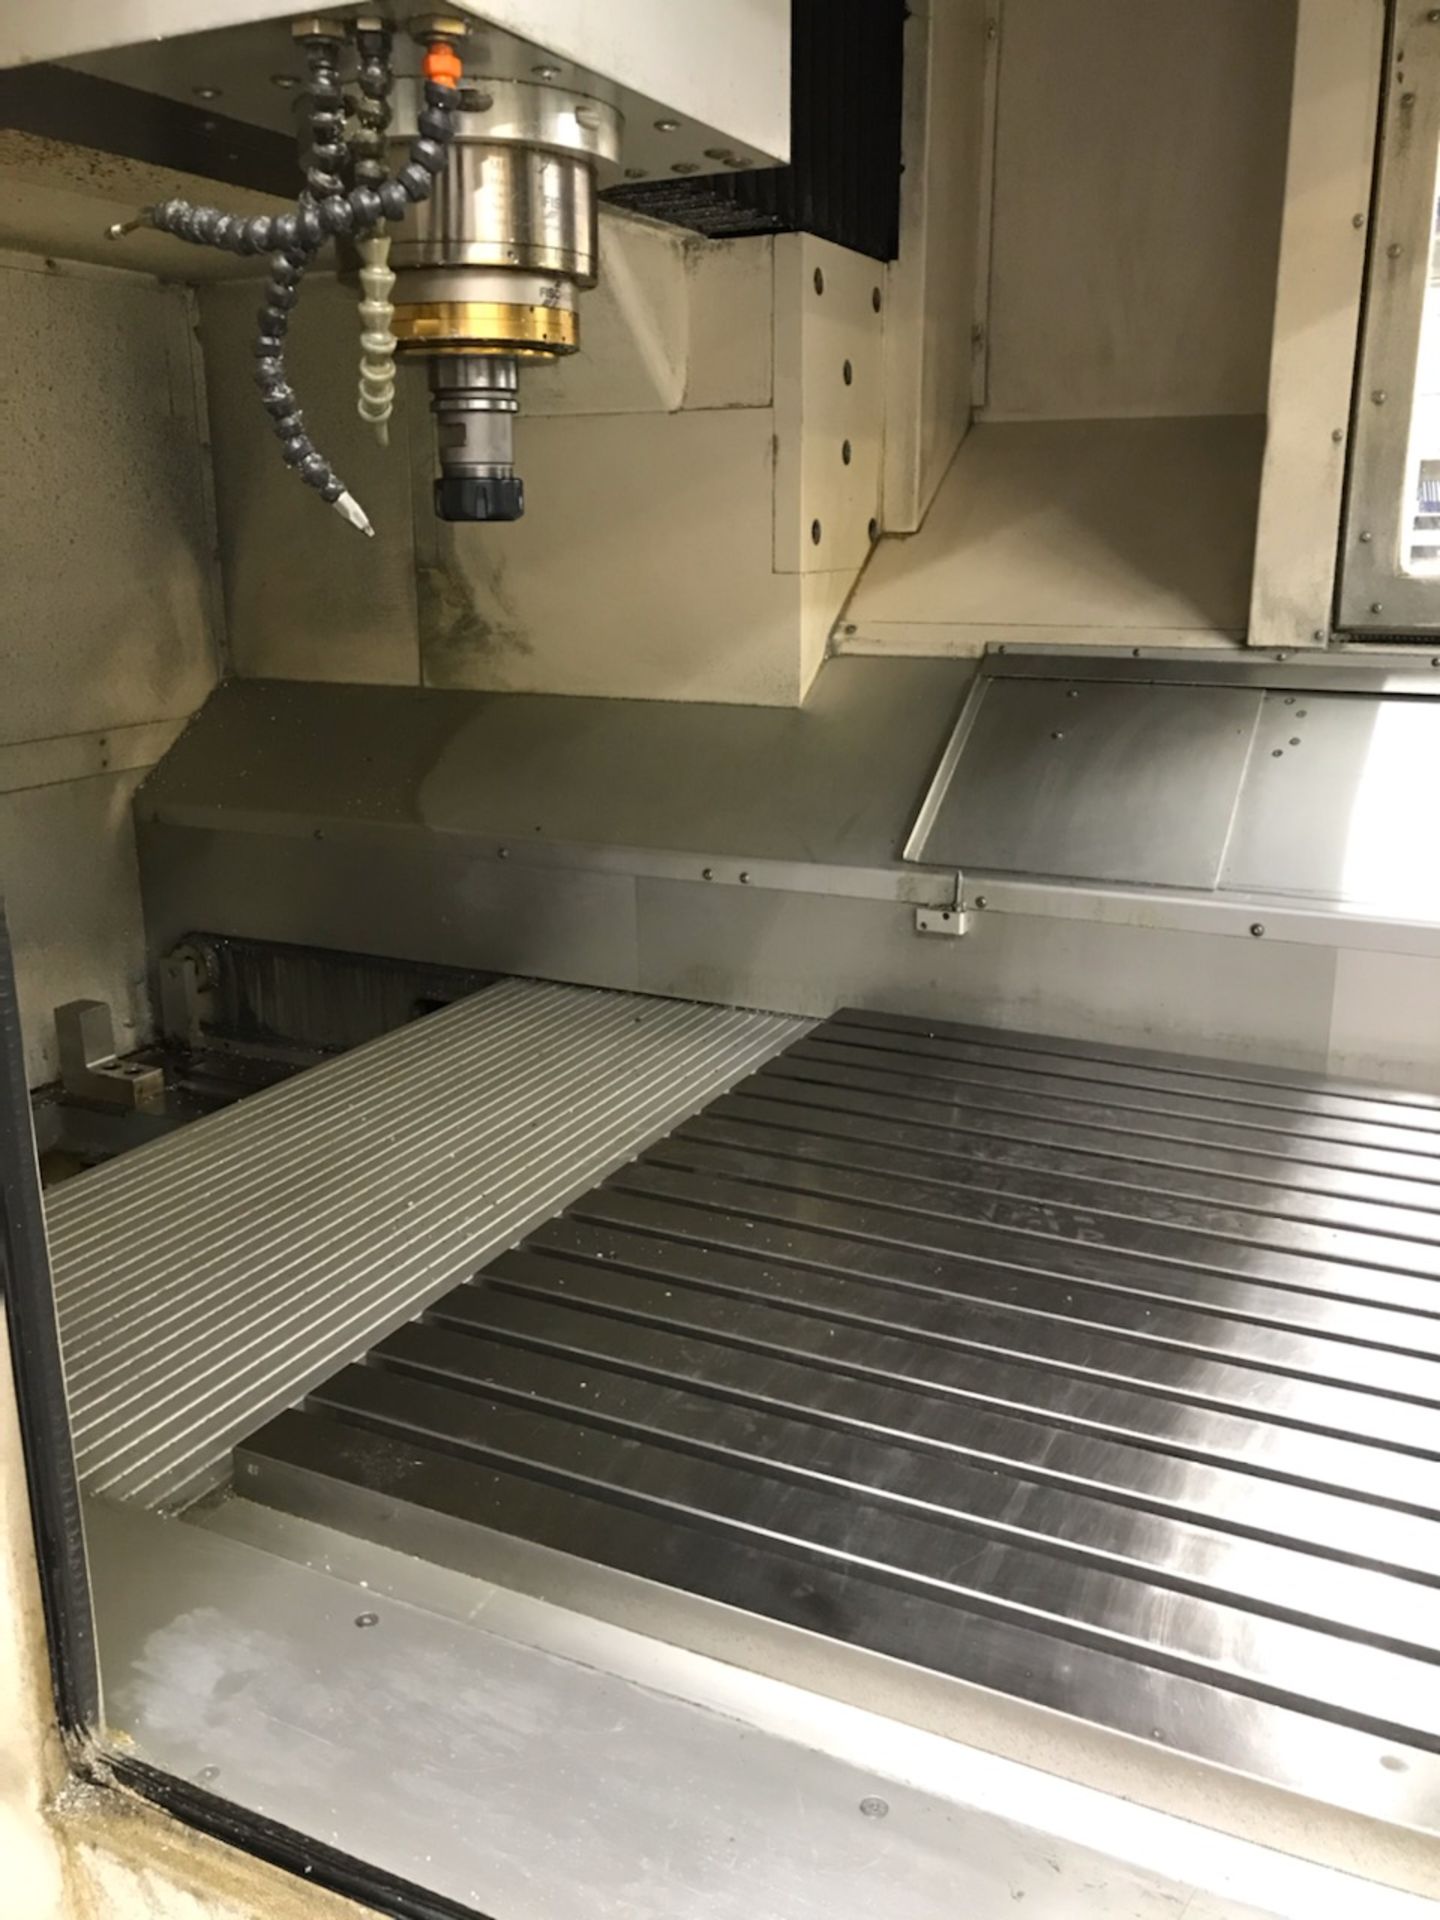 Roders RFM 1000 CNC 3-Axis Vertical Machining Center, S/N 10722-65 - Image 6 of 16